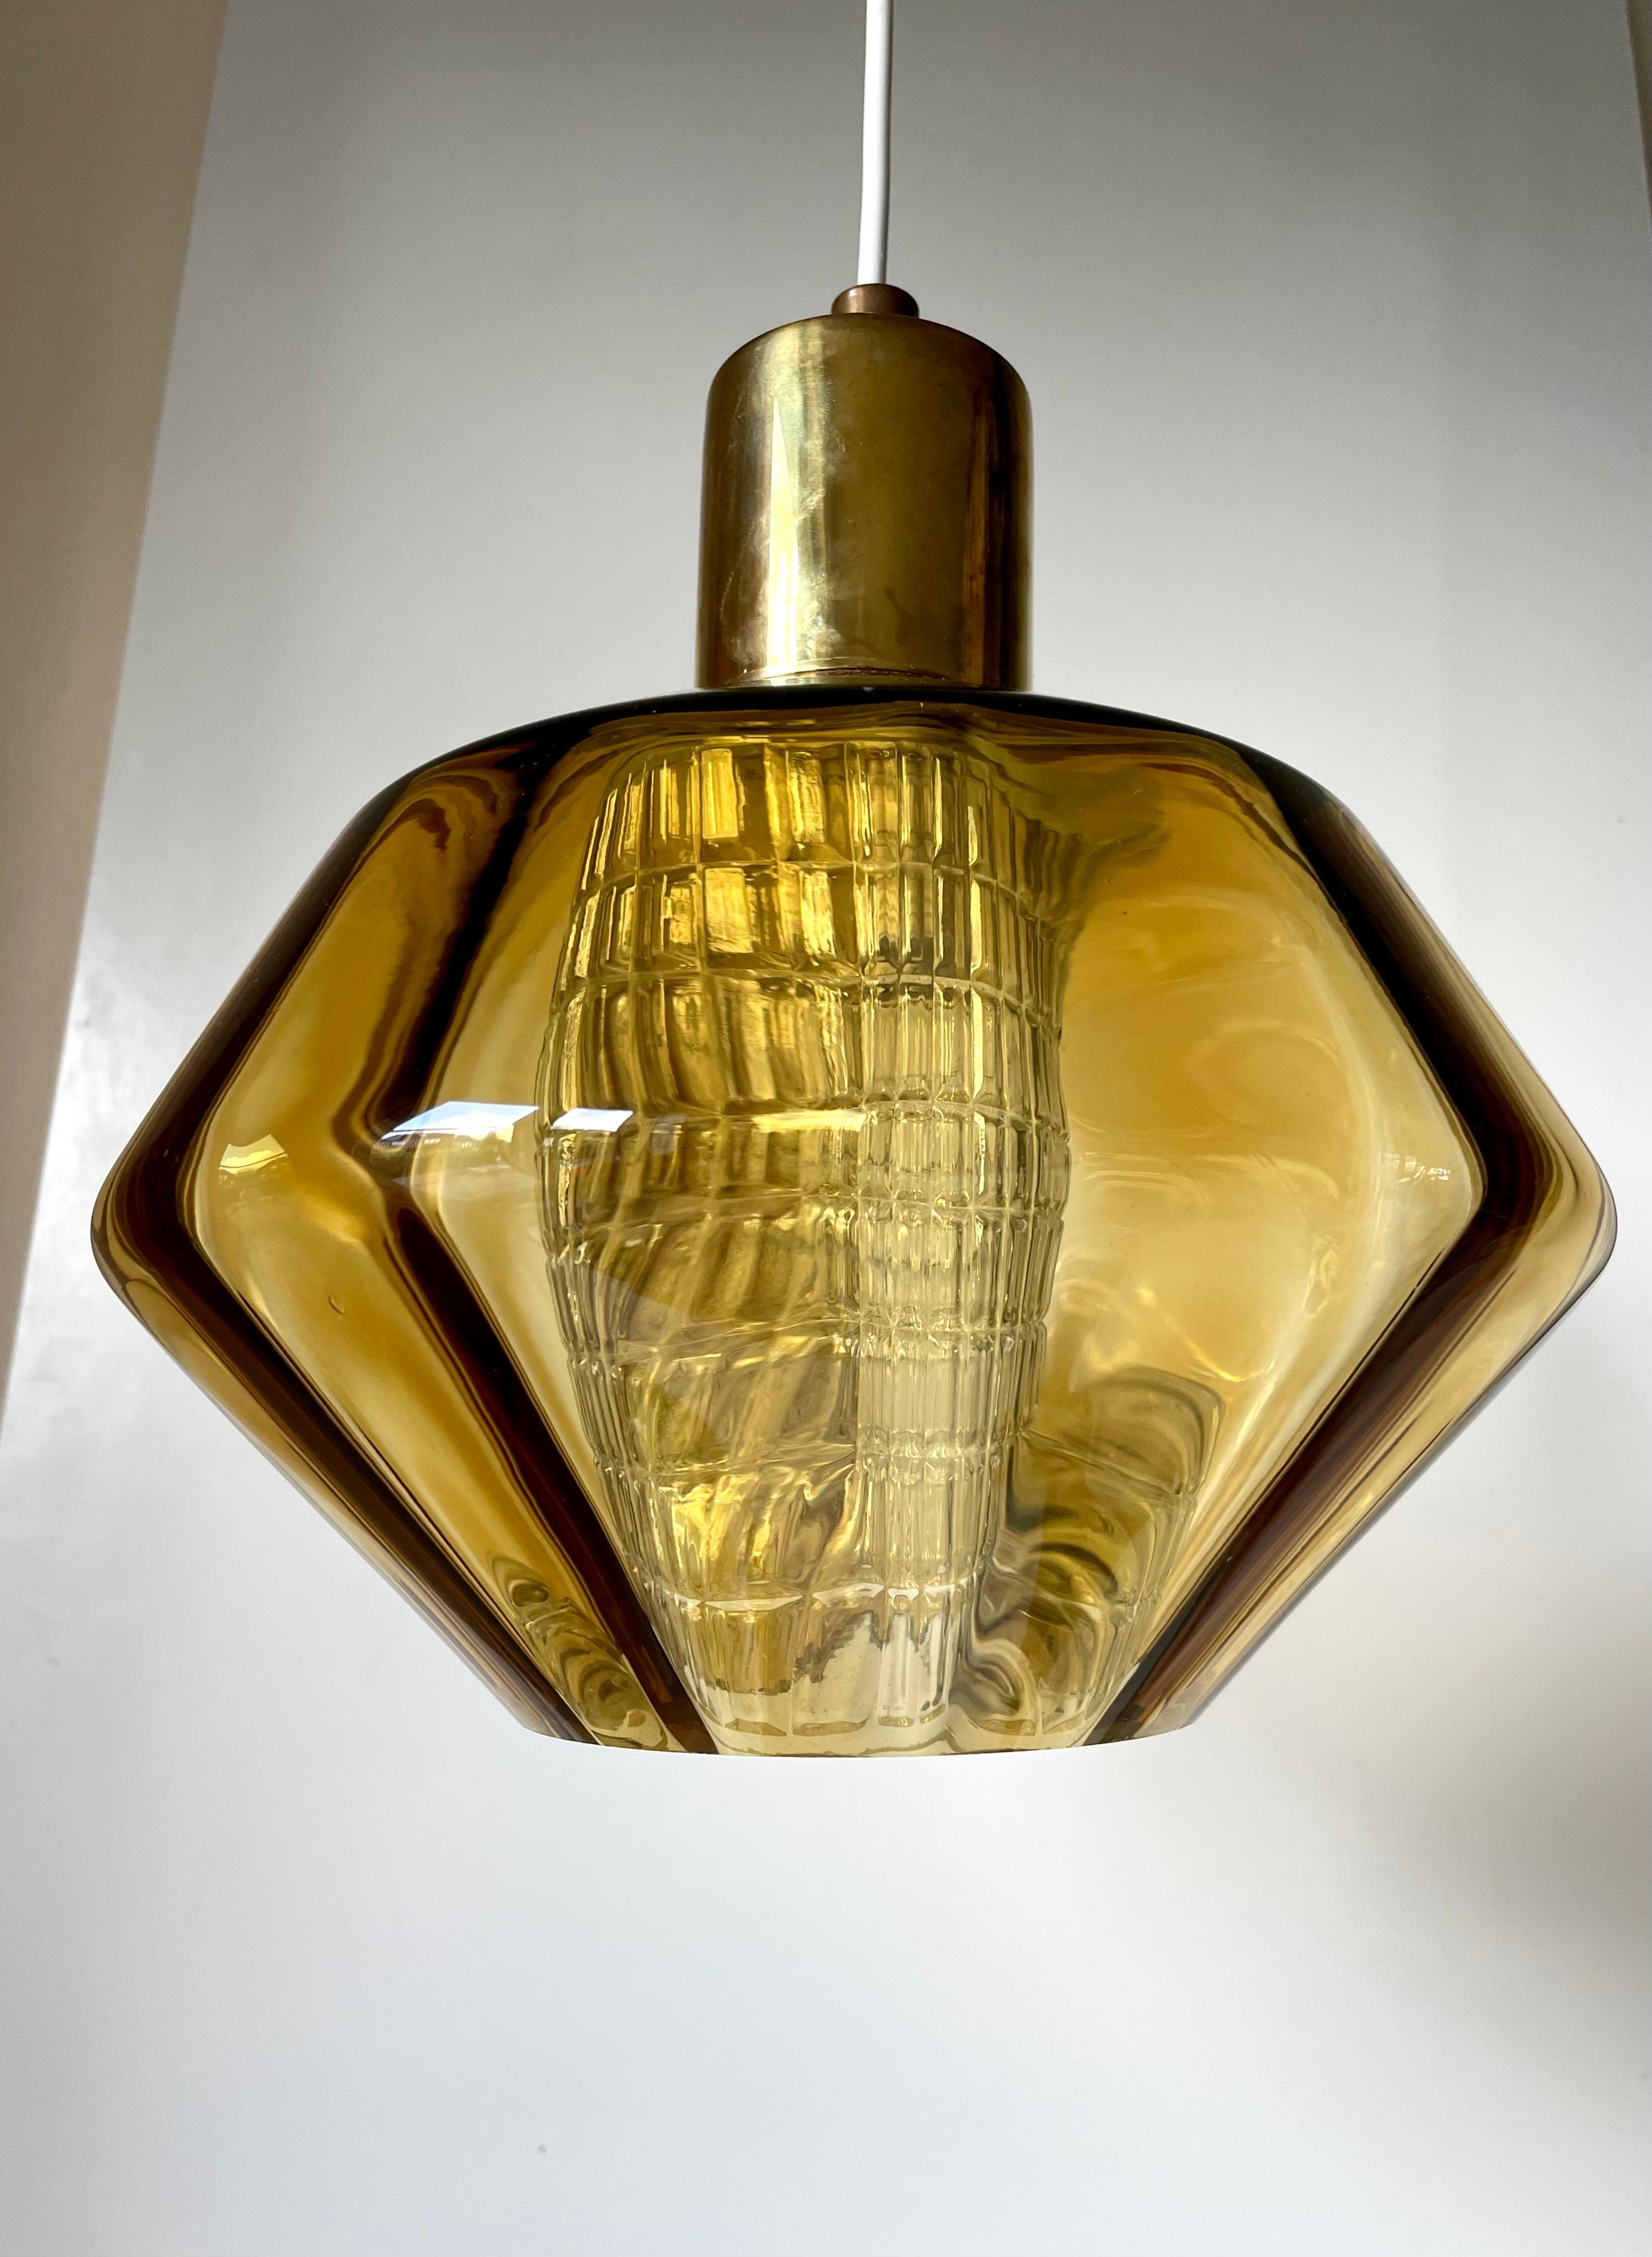 Swedish midcentury modern regency art glass pendant manufactured by Orrefors in the 1950s. Cylinder shaped clear textured glass within a mouthblown shade of thick amber colored soft angled glass. Brass top. Rewired with original fitting for E27